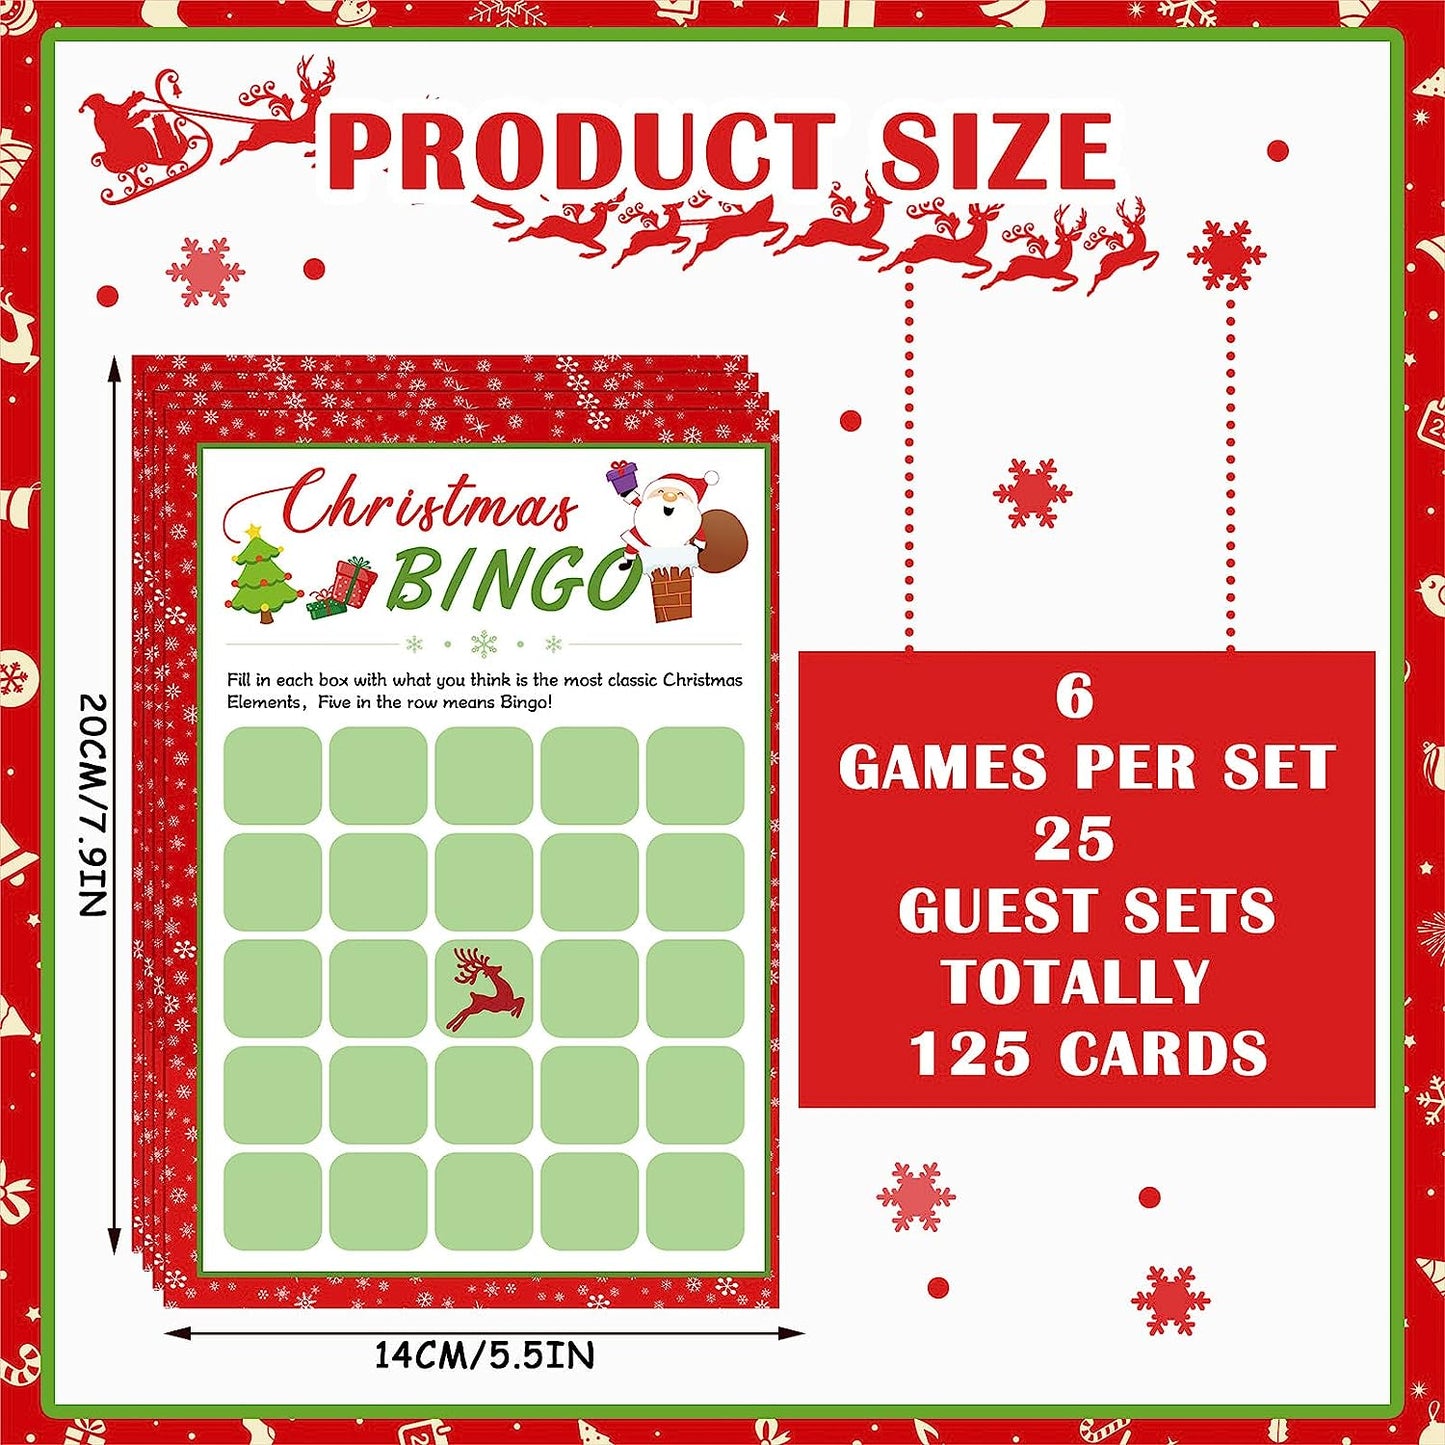 150 Sheets Chris as Bingo Game Xmas Holiday Winter Party Supplies Favors Word Scramble Games Word Search Game Funny Chris as Party Game Set for Kids School Classroom Prizes, 6 Styles